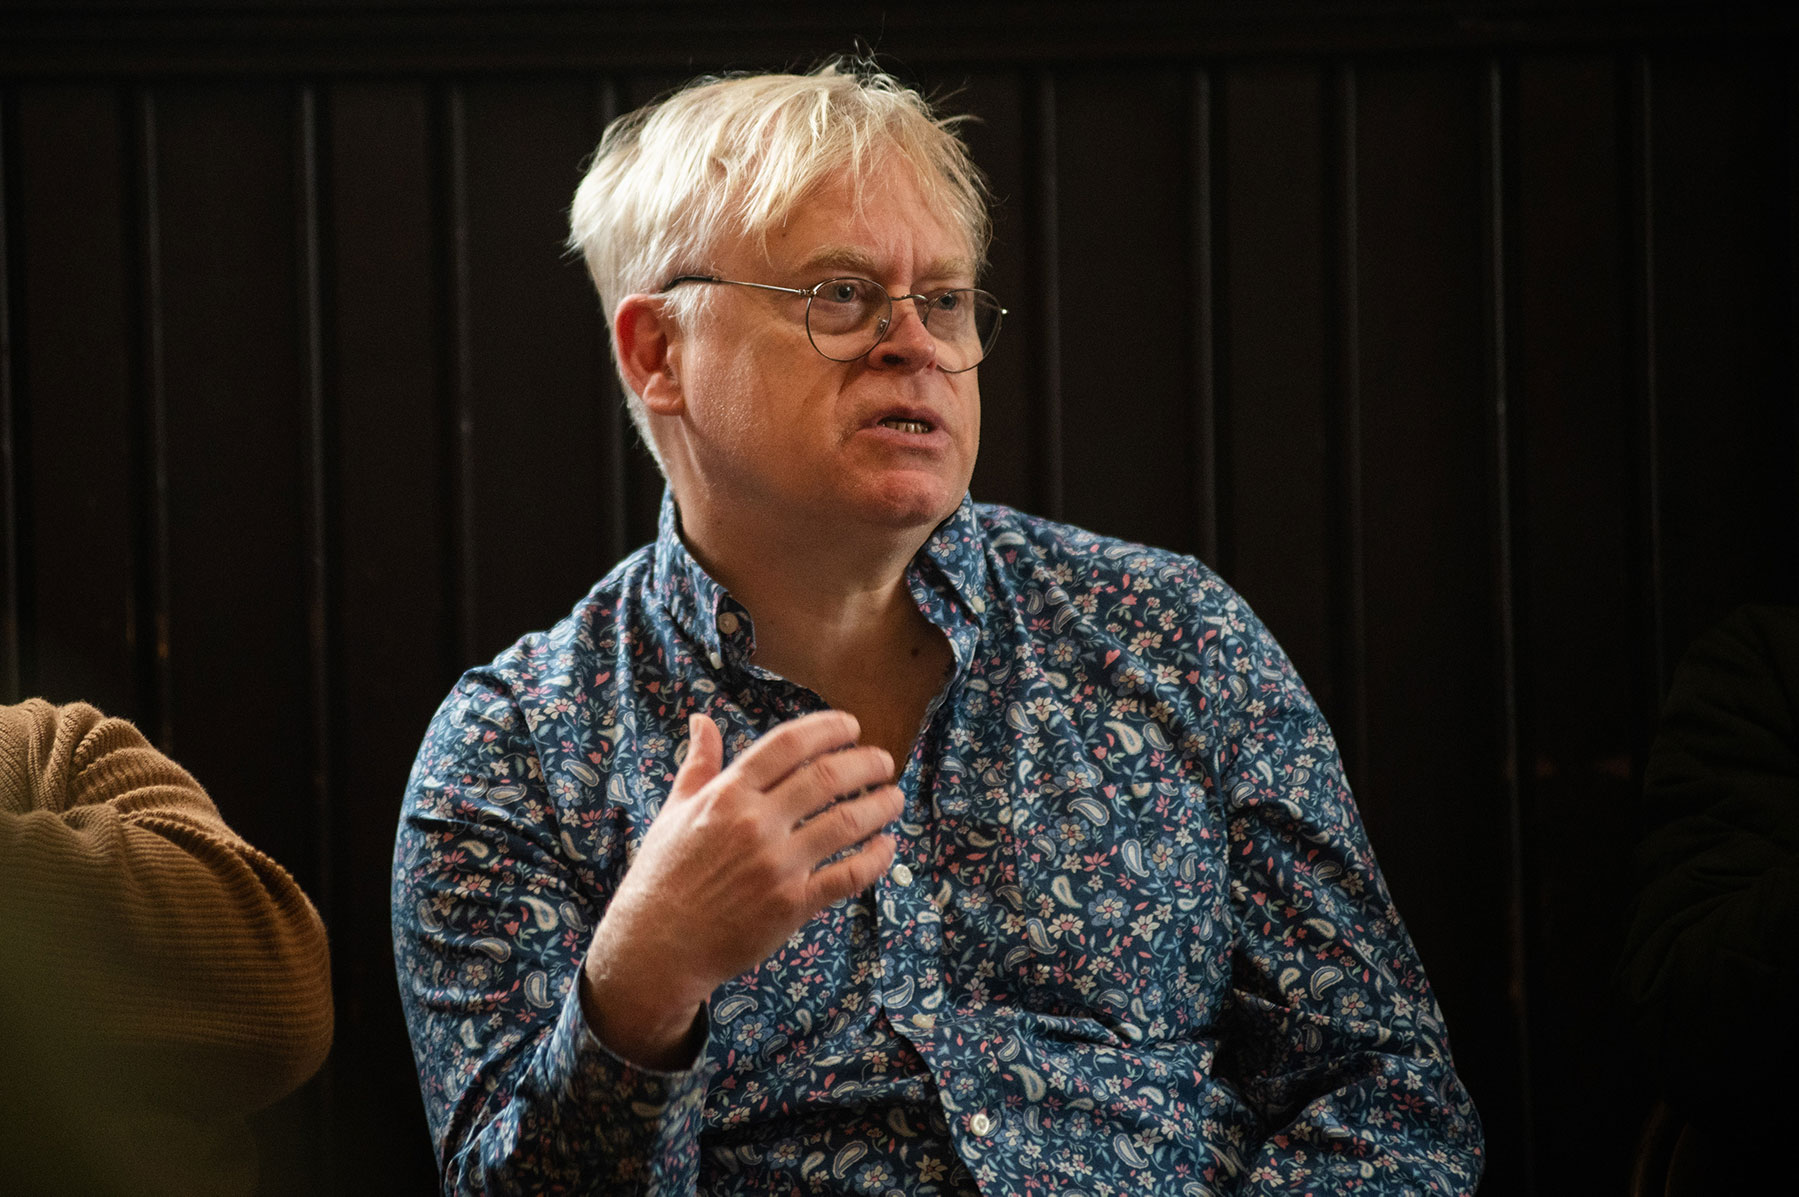 Person with white blonde hair, glasses, and a blue shirt sitting on a stage speaking.